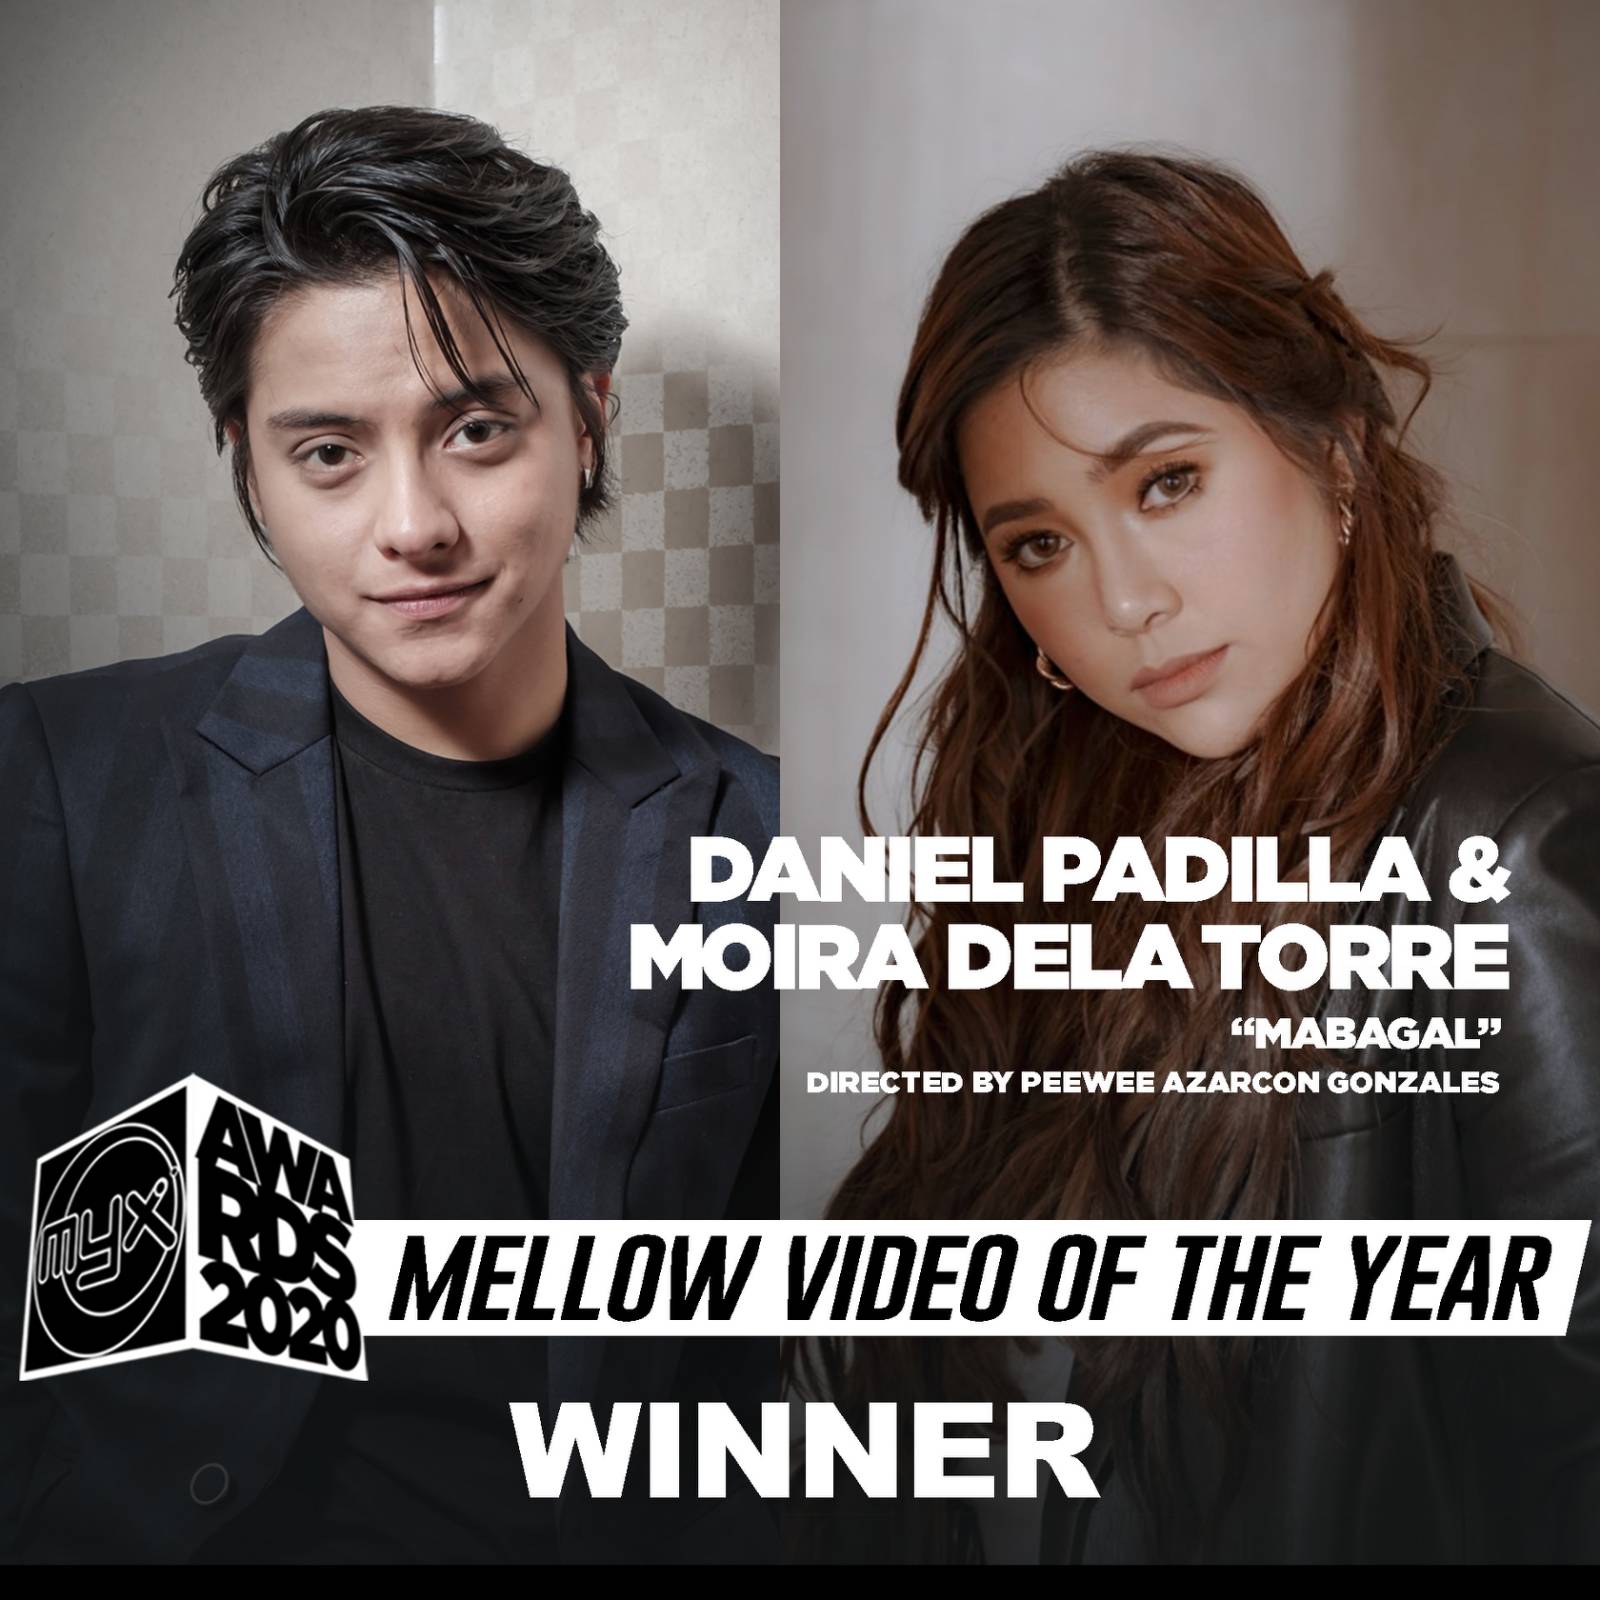 Mabagal by Daniel Padilla and Moira dela Torre is Mello Video of the Year